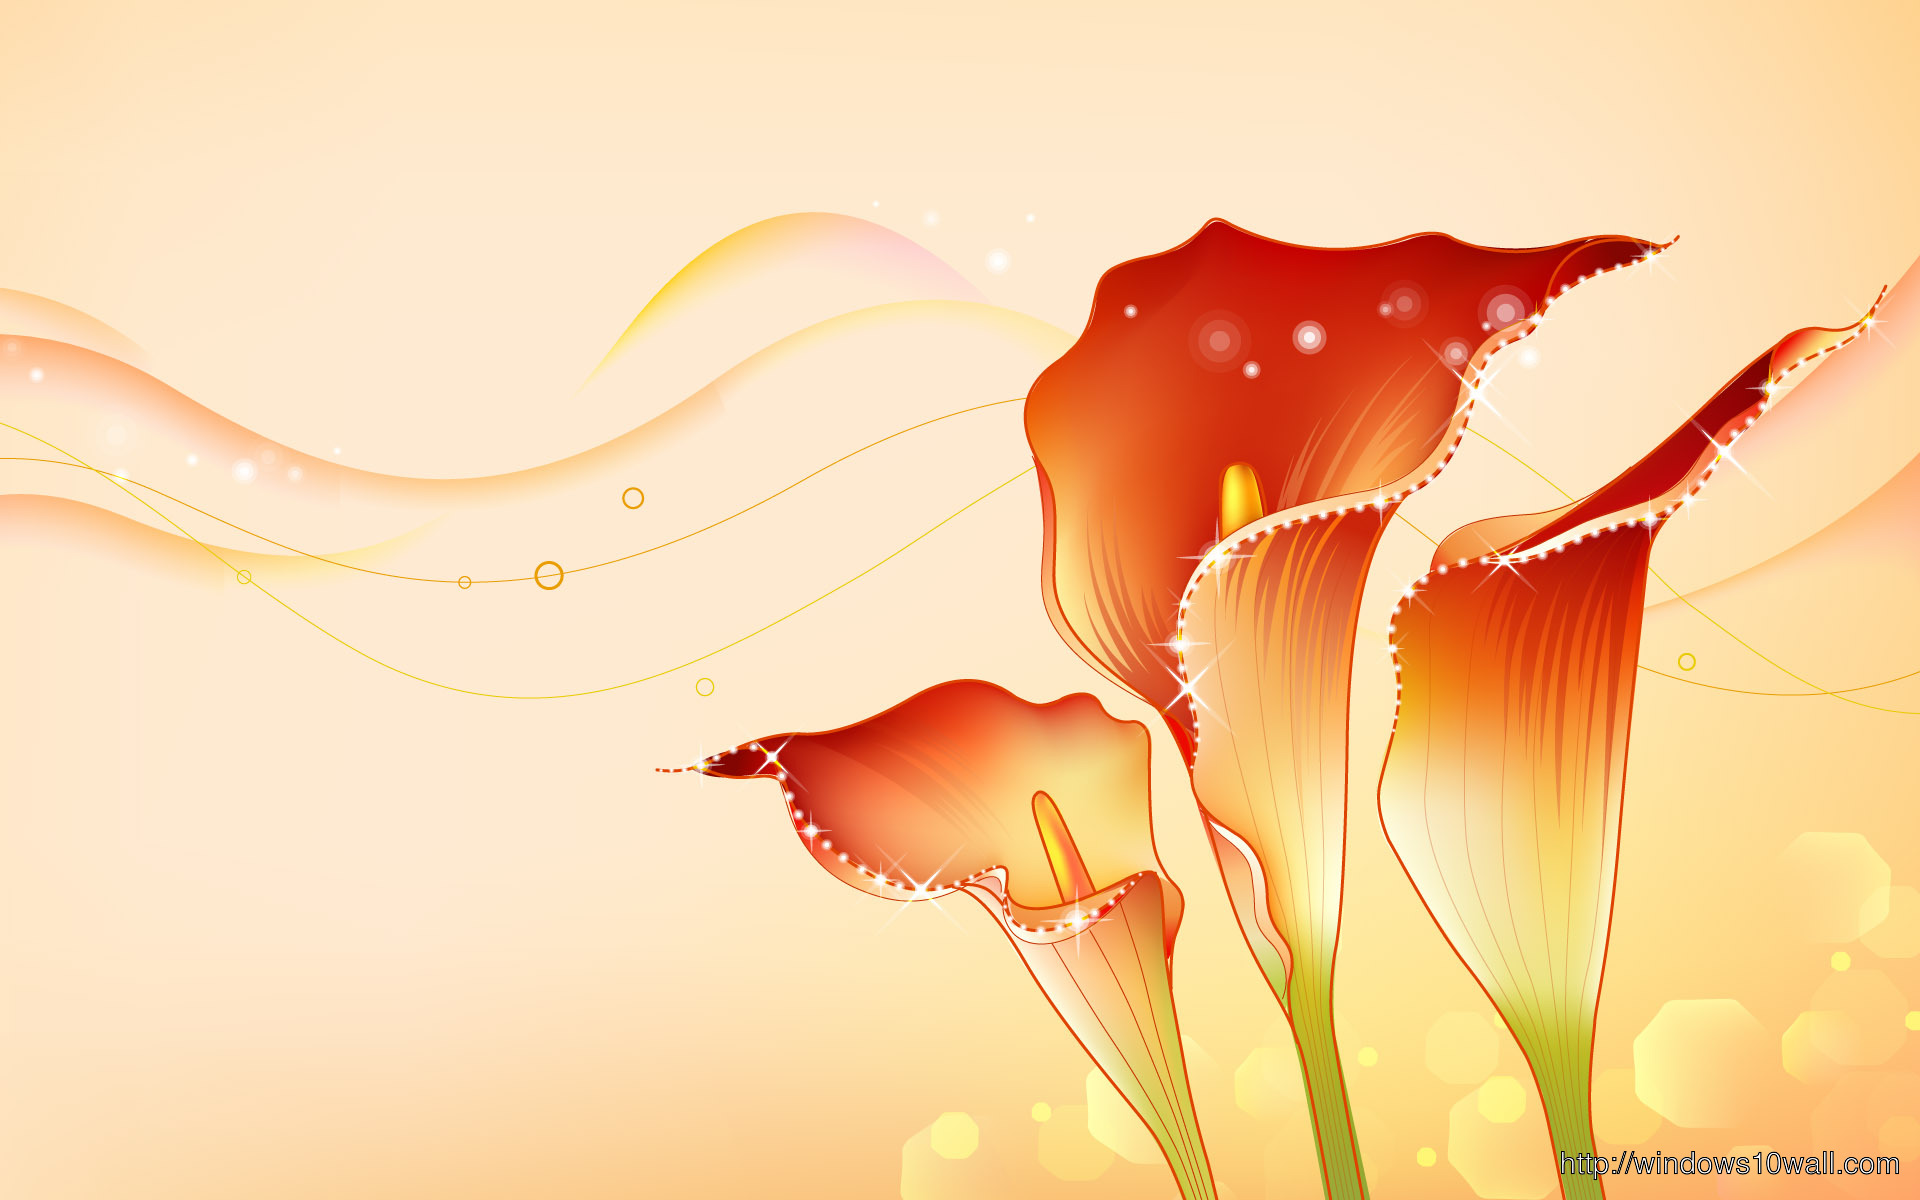 New Abstract Flowers Design Background Wallpaper